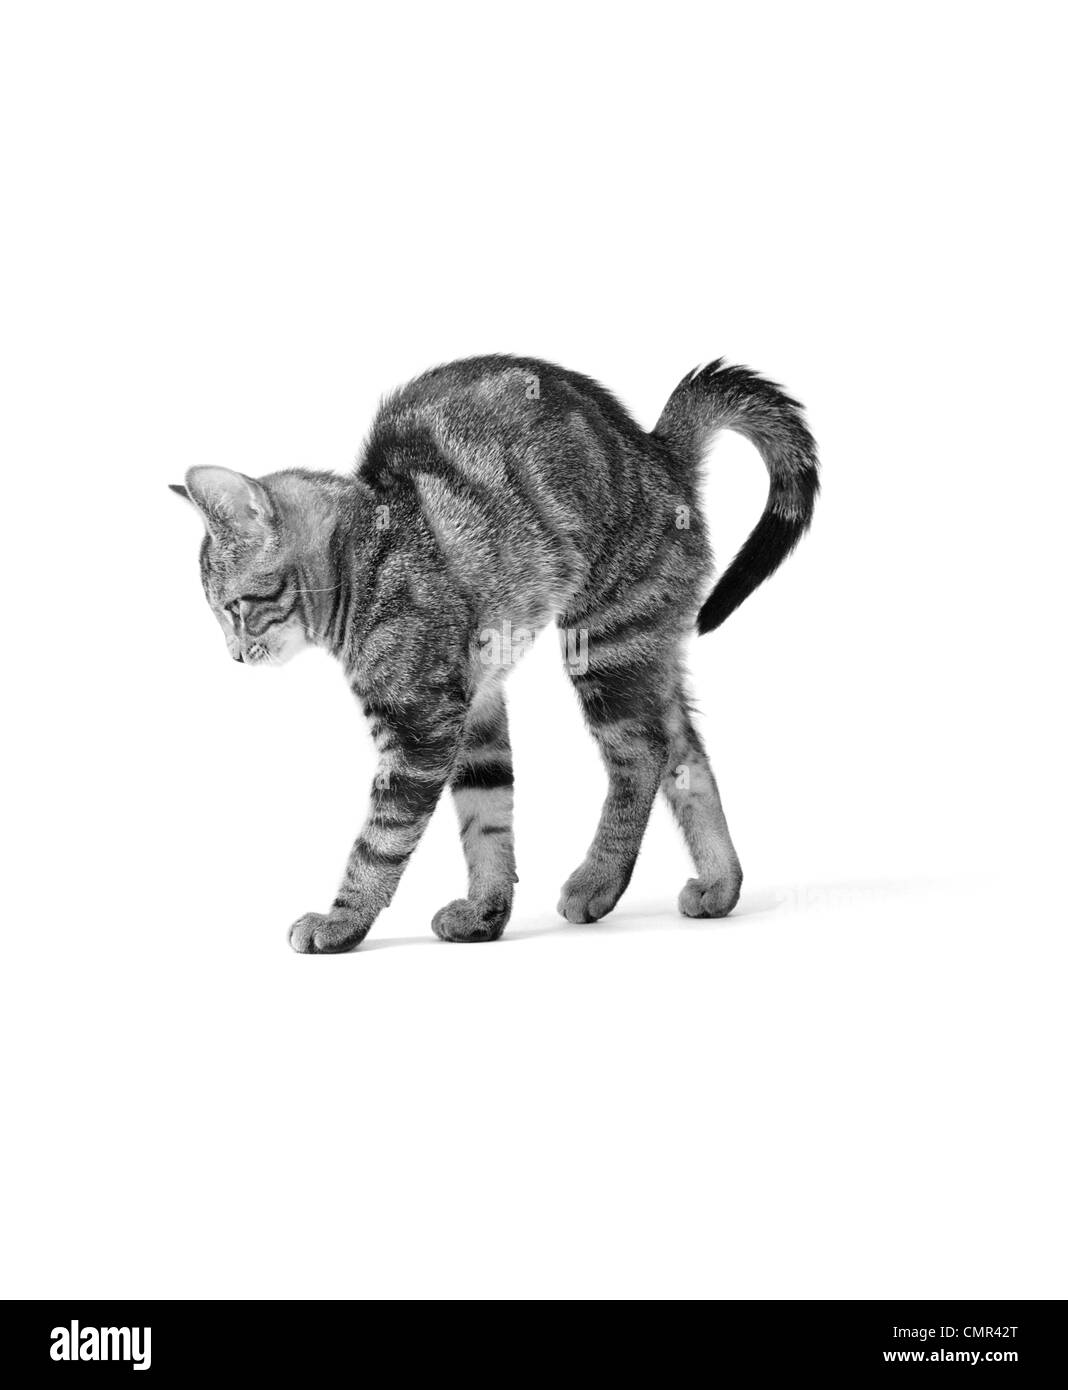 1960s SIDE VIEW OF KITTEN STRETCHING OUT WITH ARCHED BACK Stock Photo